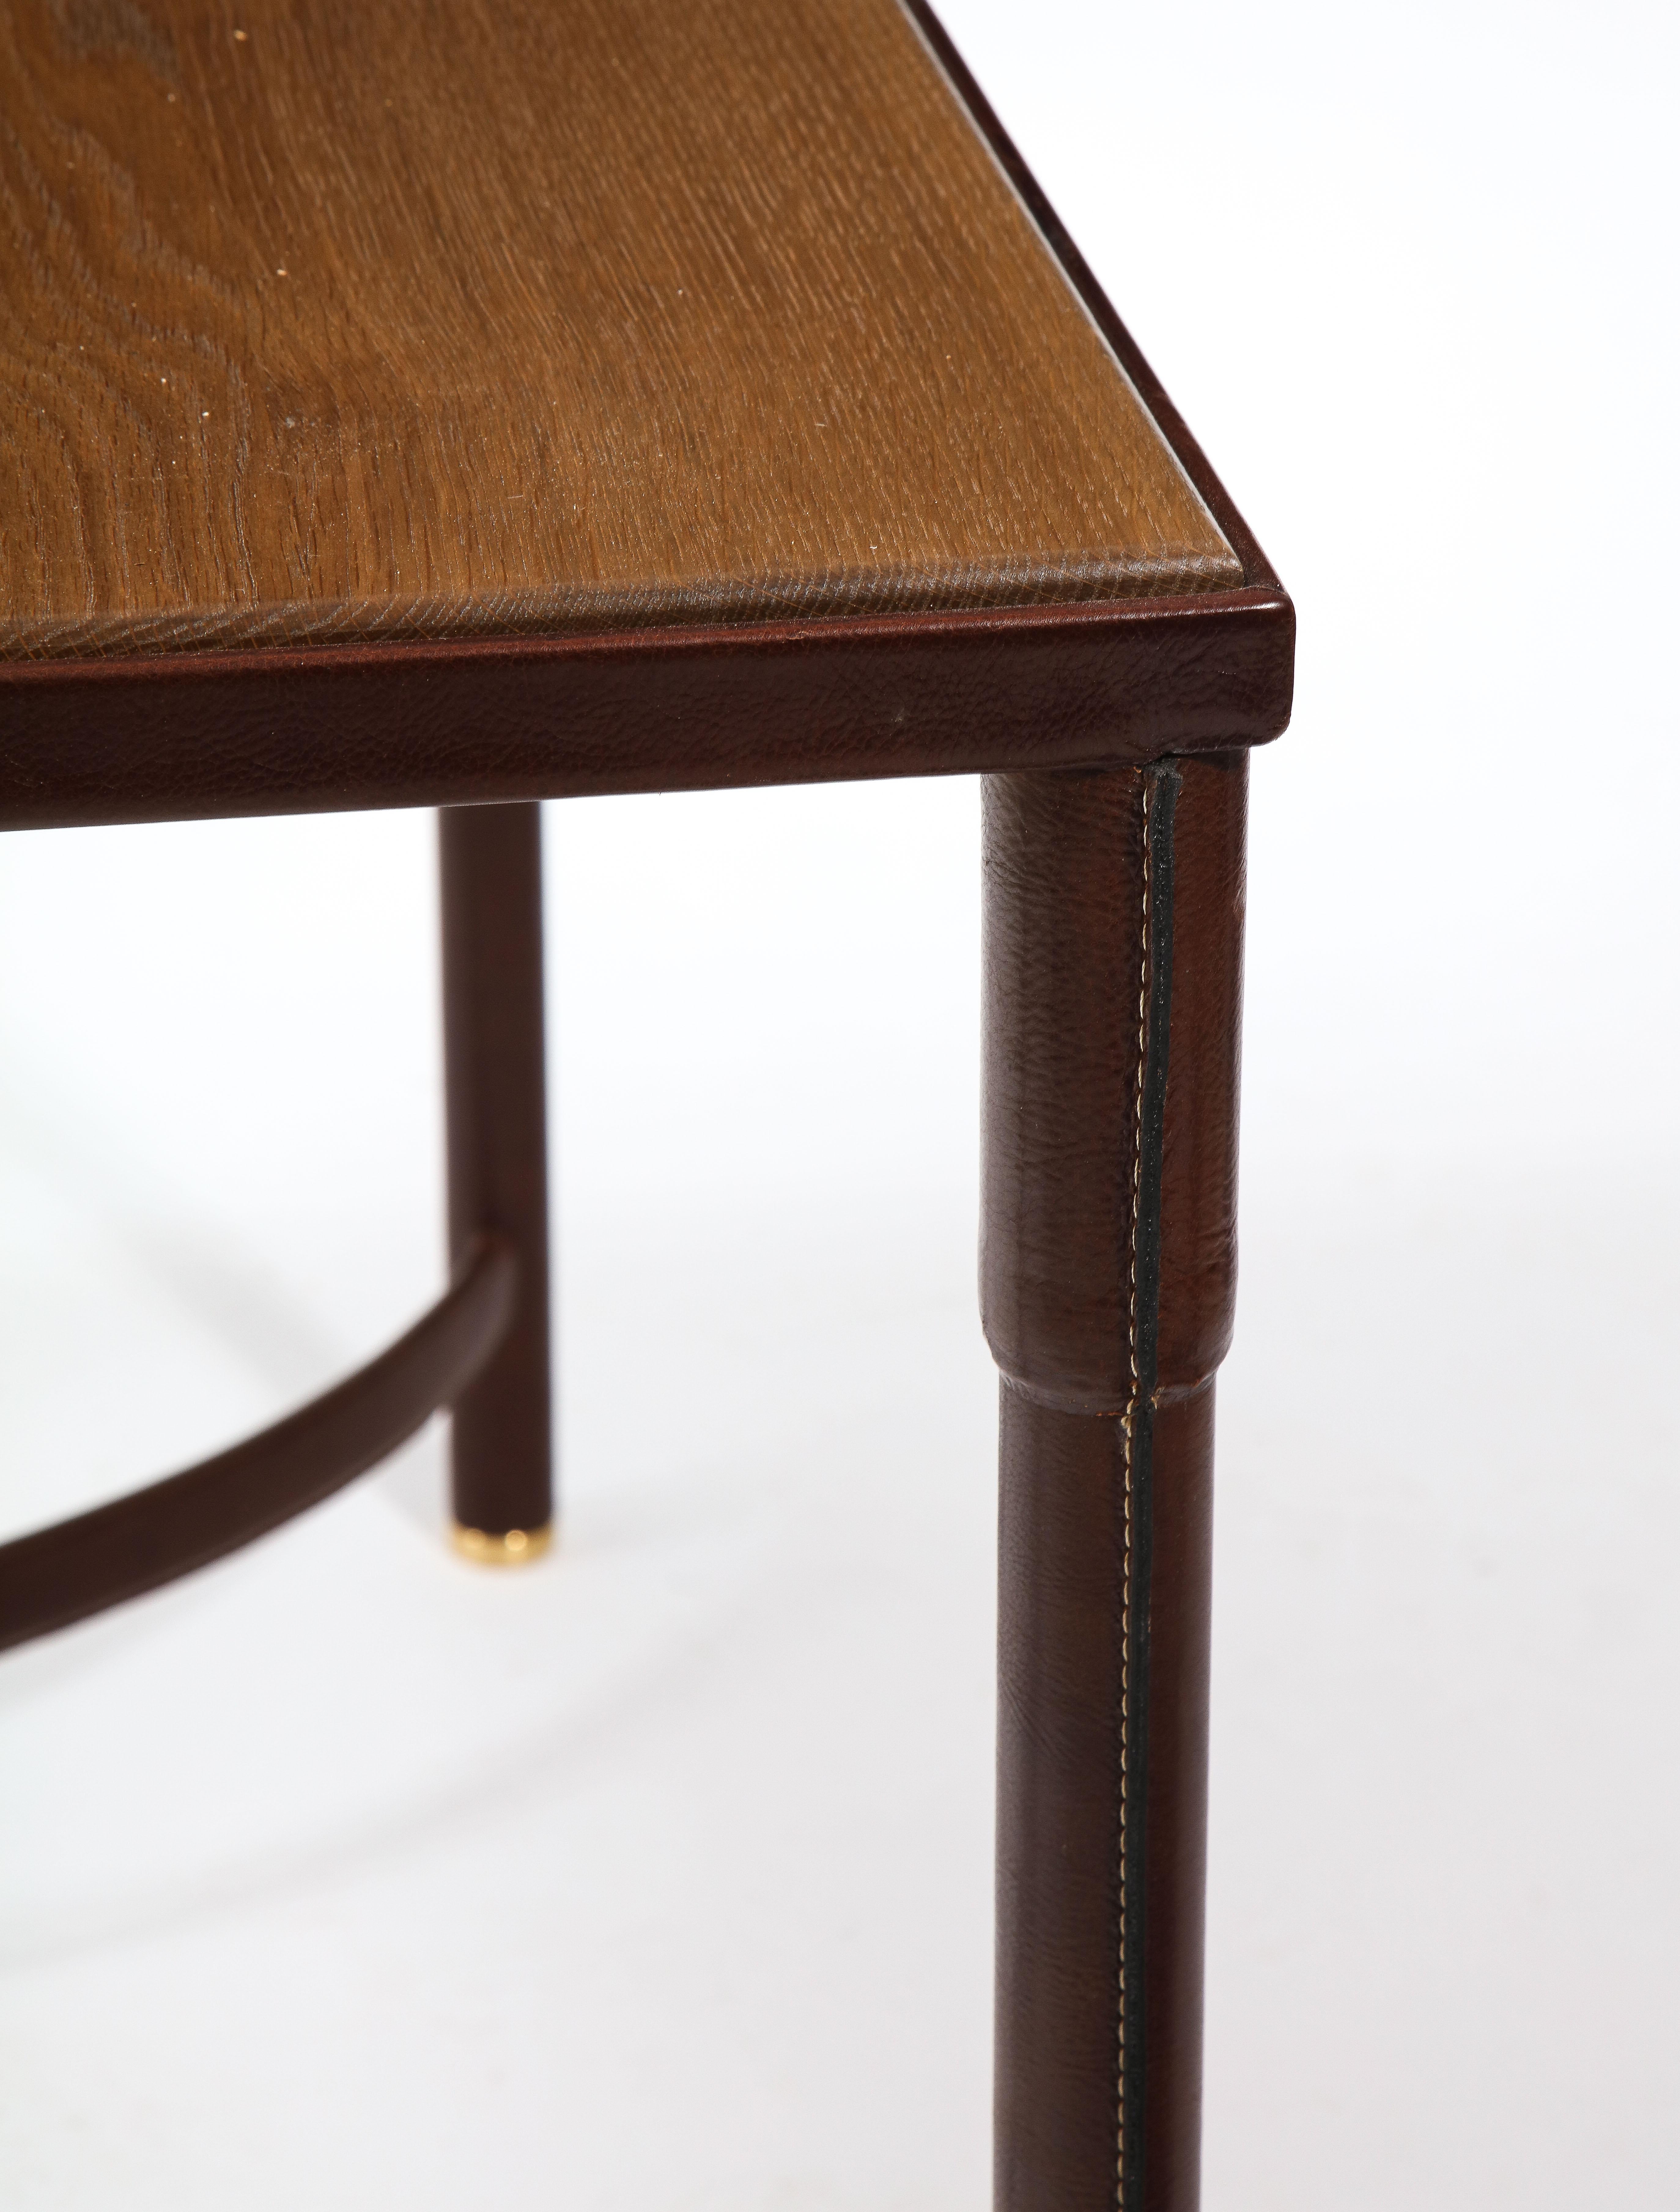 Elegant Jacques Adnet center table or writing desk in stitched leather with an oak top. The leather was expertly restored as per the original by the foremost restoration studio in the USA. It has a double-sided U-shaped stretcher connected by a